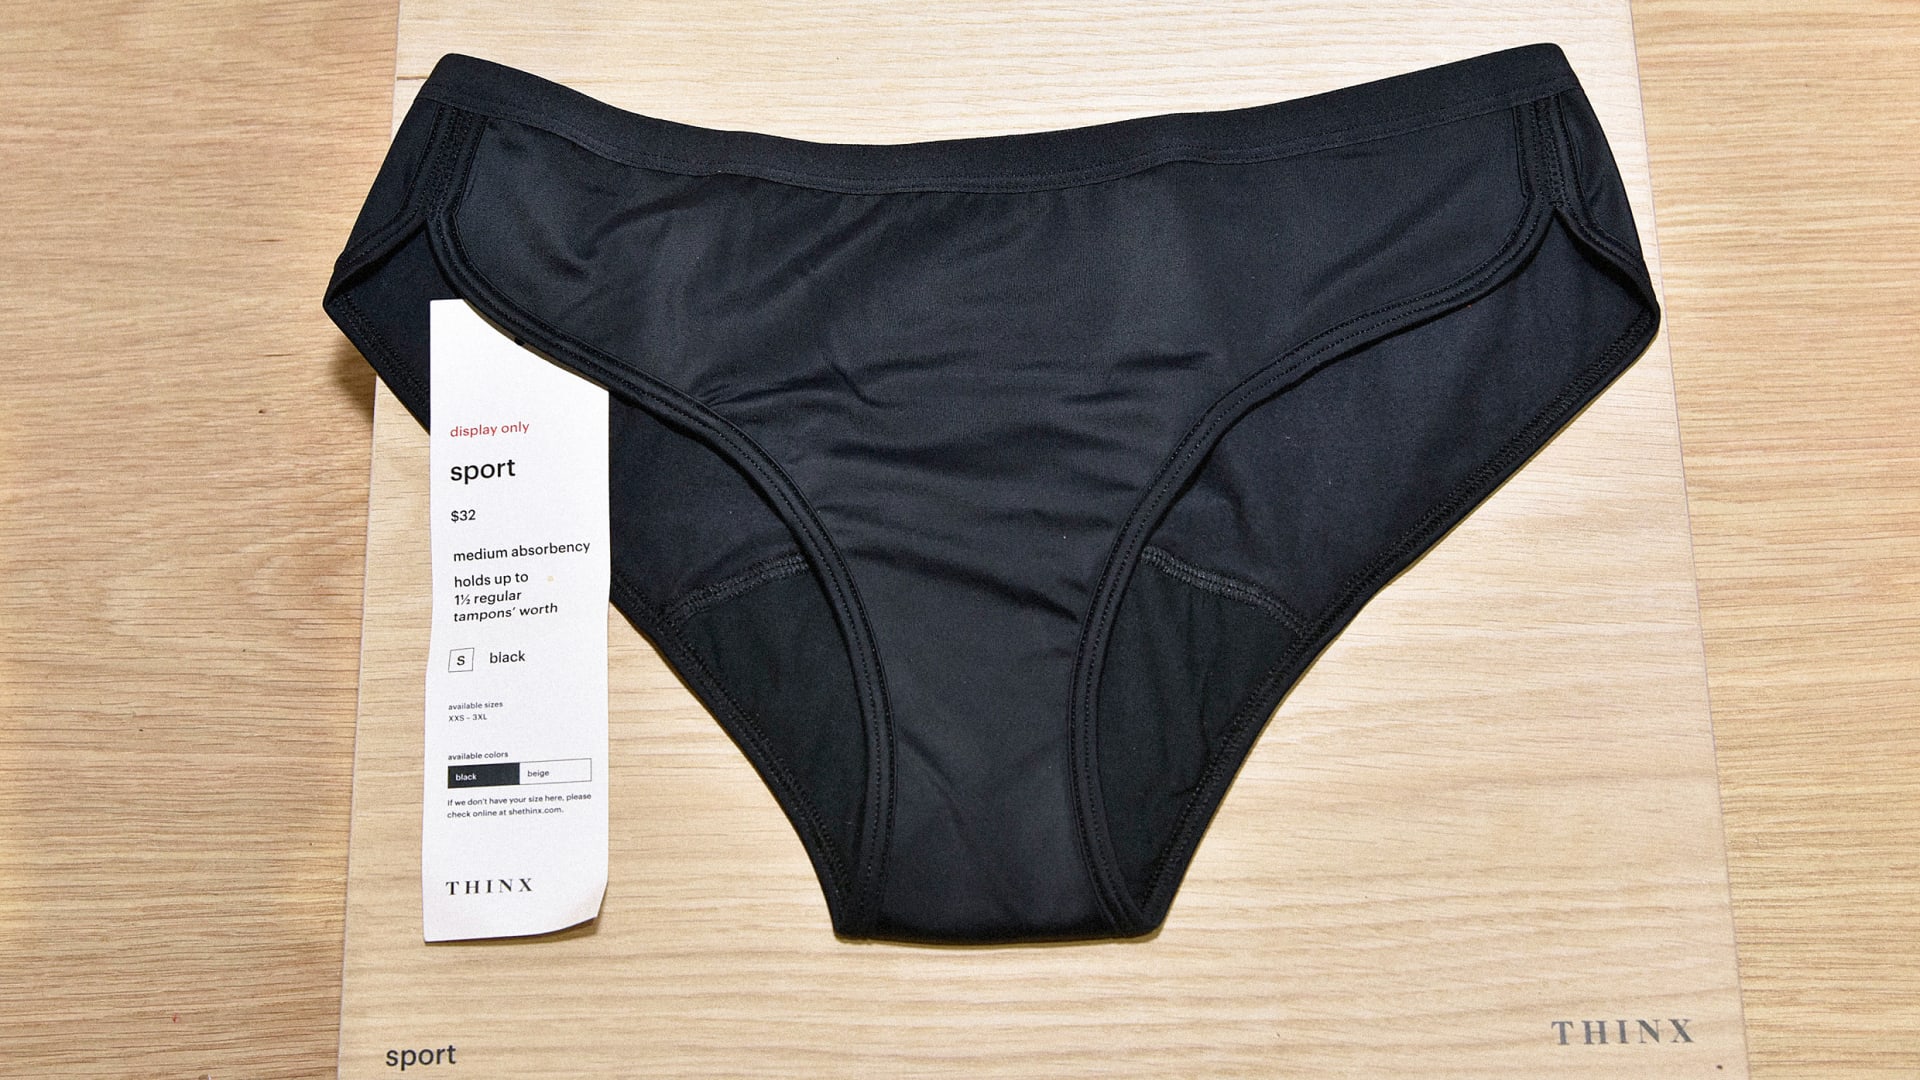 Report: Thinx menstrual underwear has toxic chemicals in the crotch